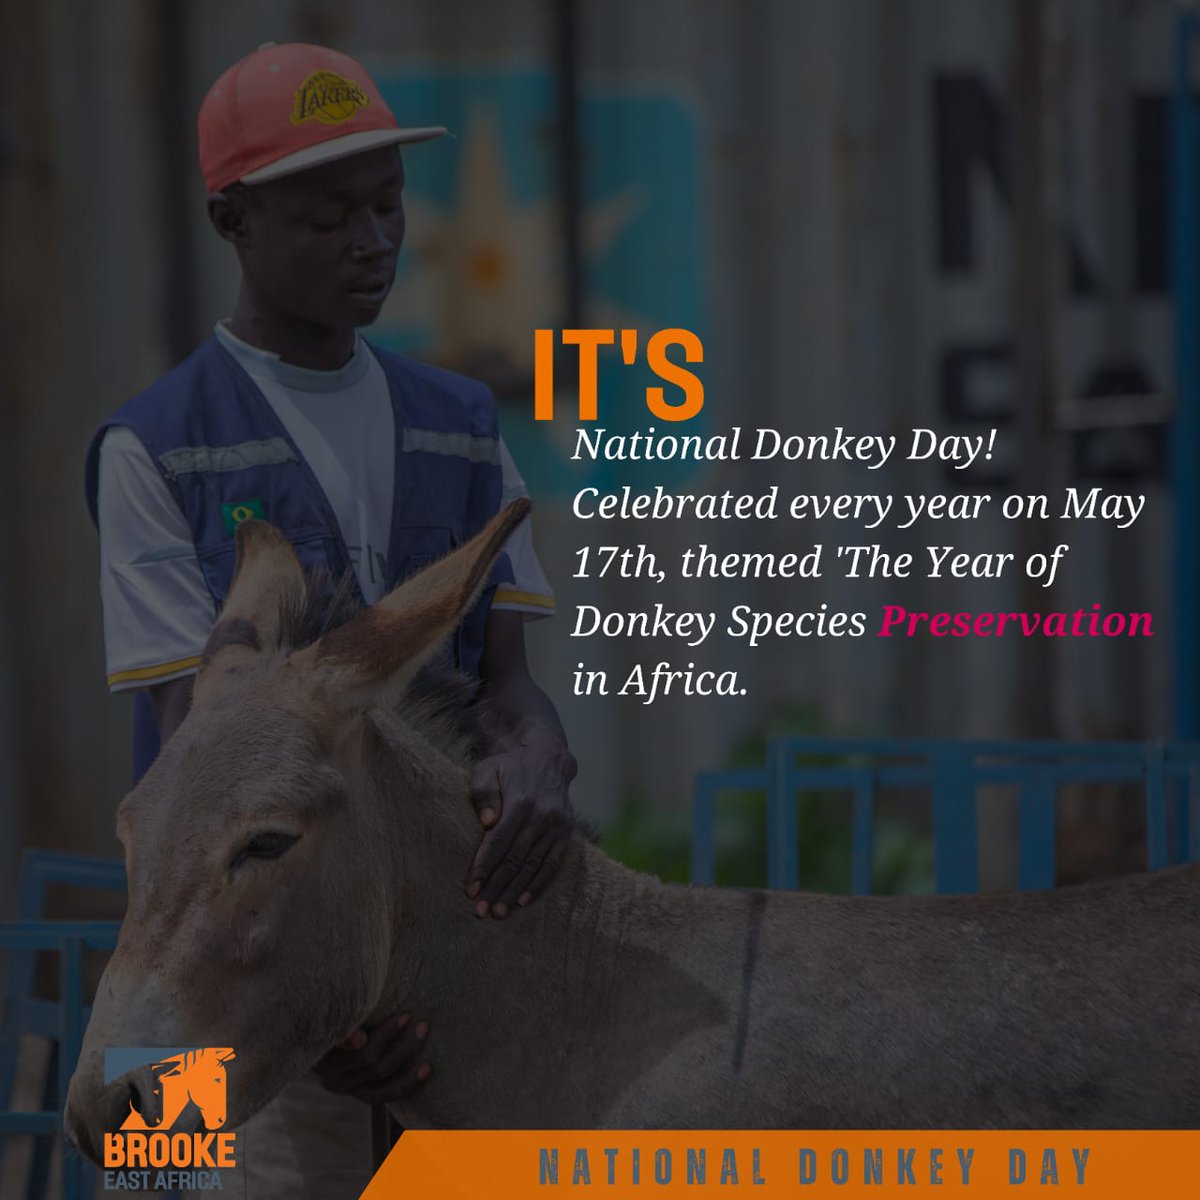 Speak For Donkeys: These animals are a cornerstone of daily life for many, making their protection a priority. #NationalDonkeyDay @TheBrookeEA @TheBrooke @moh_kenya @kilimoke @interiorke